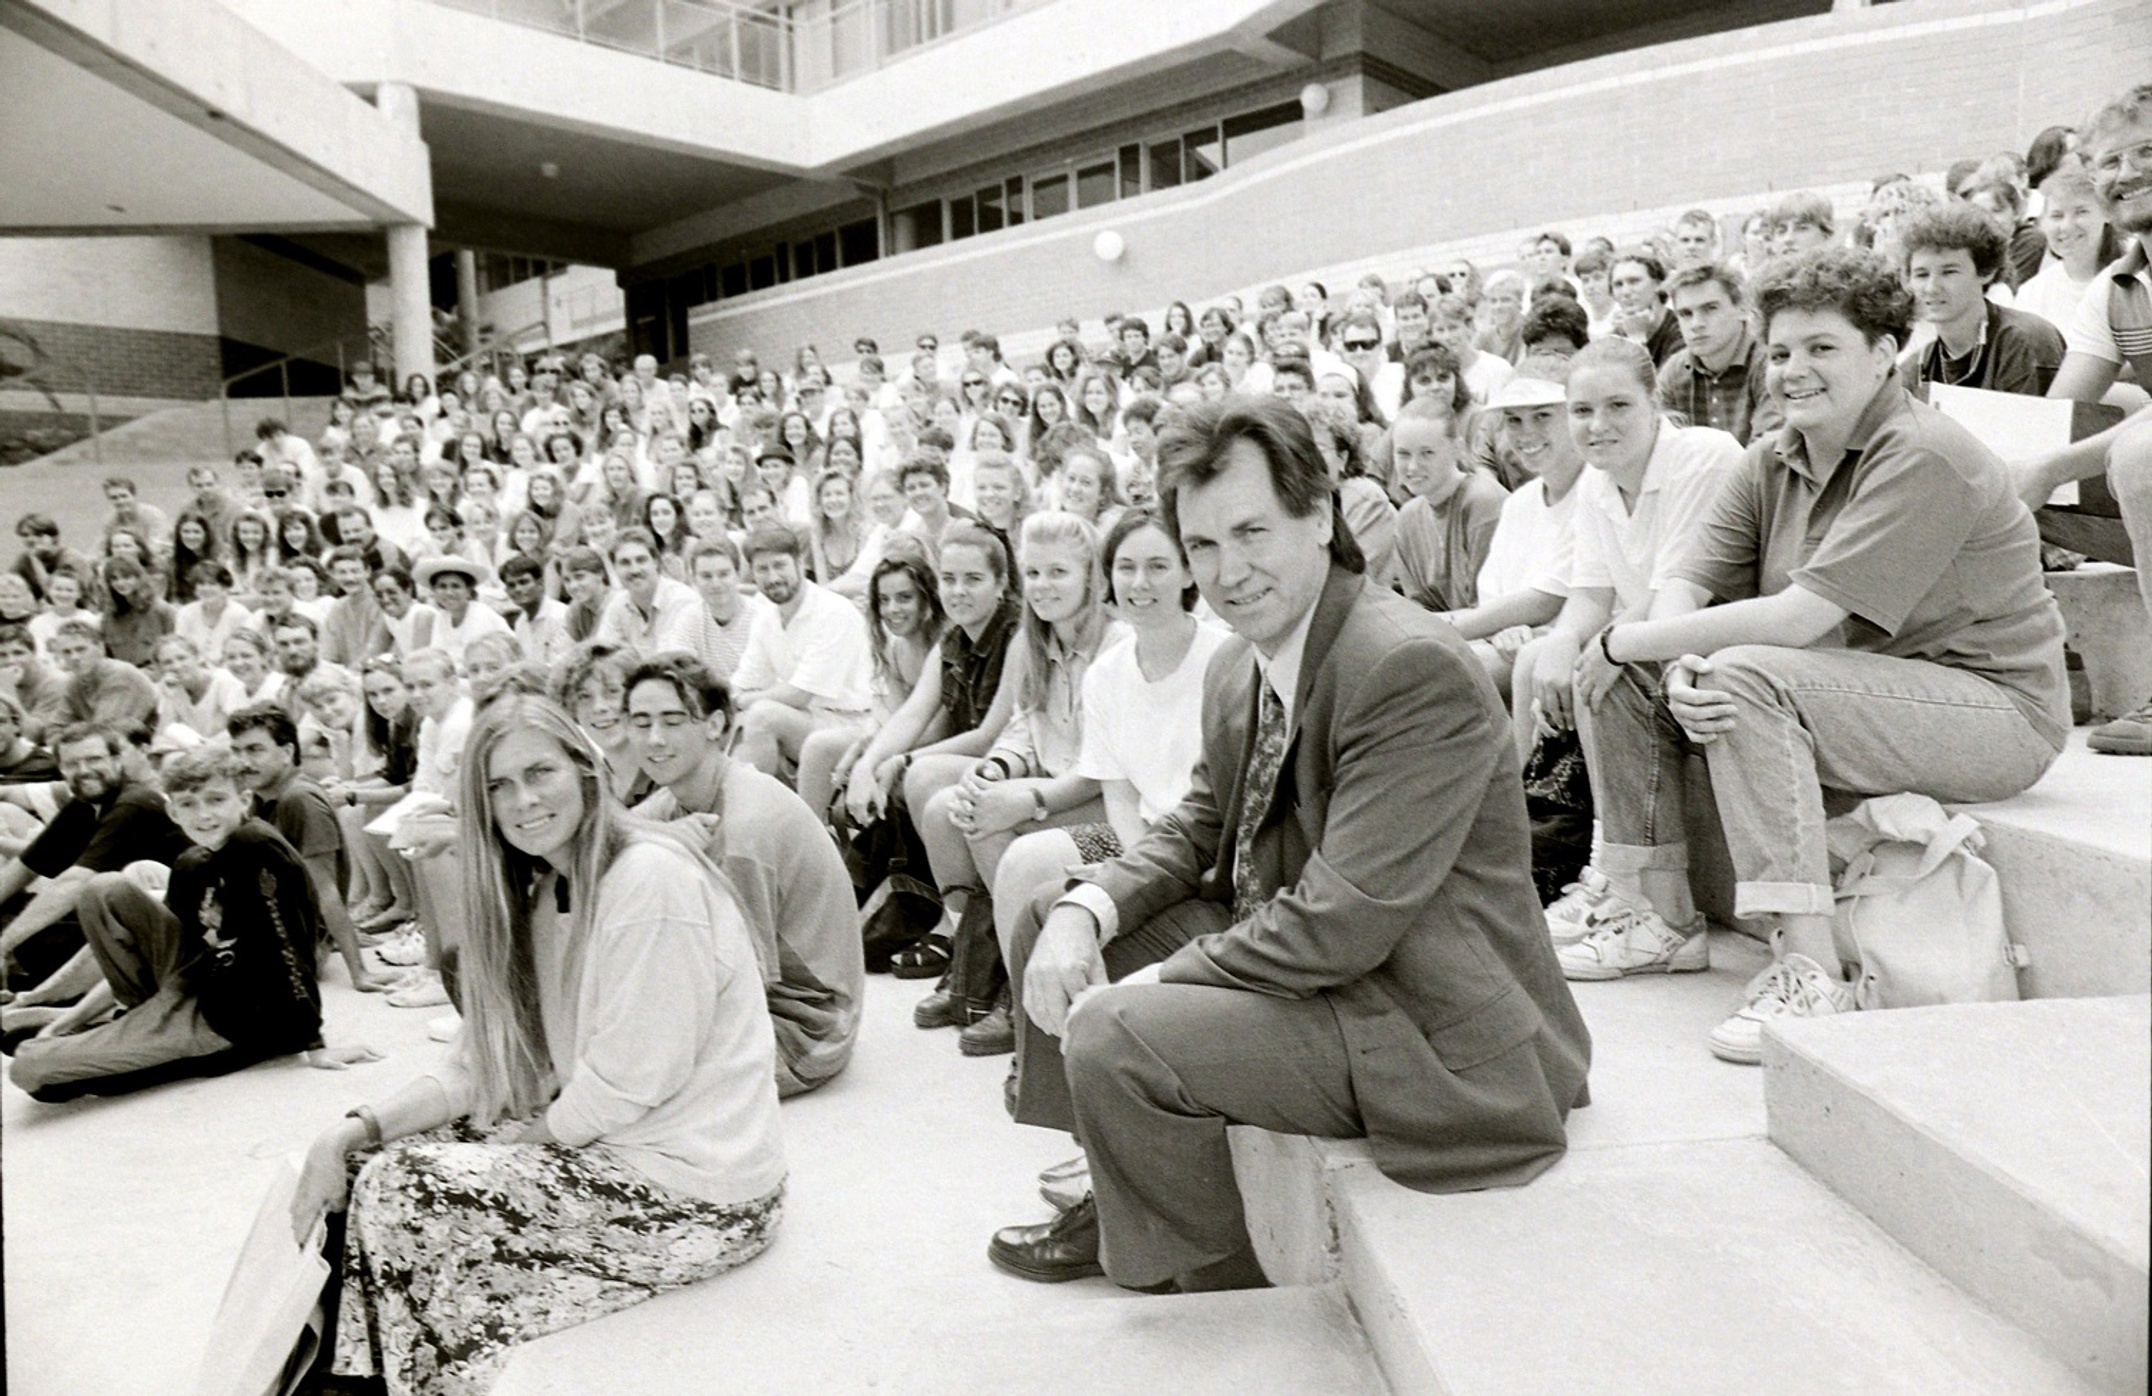 A group of people sit on tiered concrete steps looking at the camera